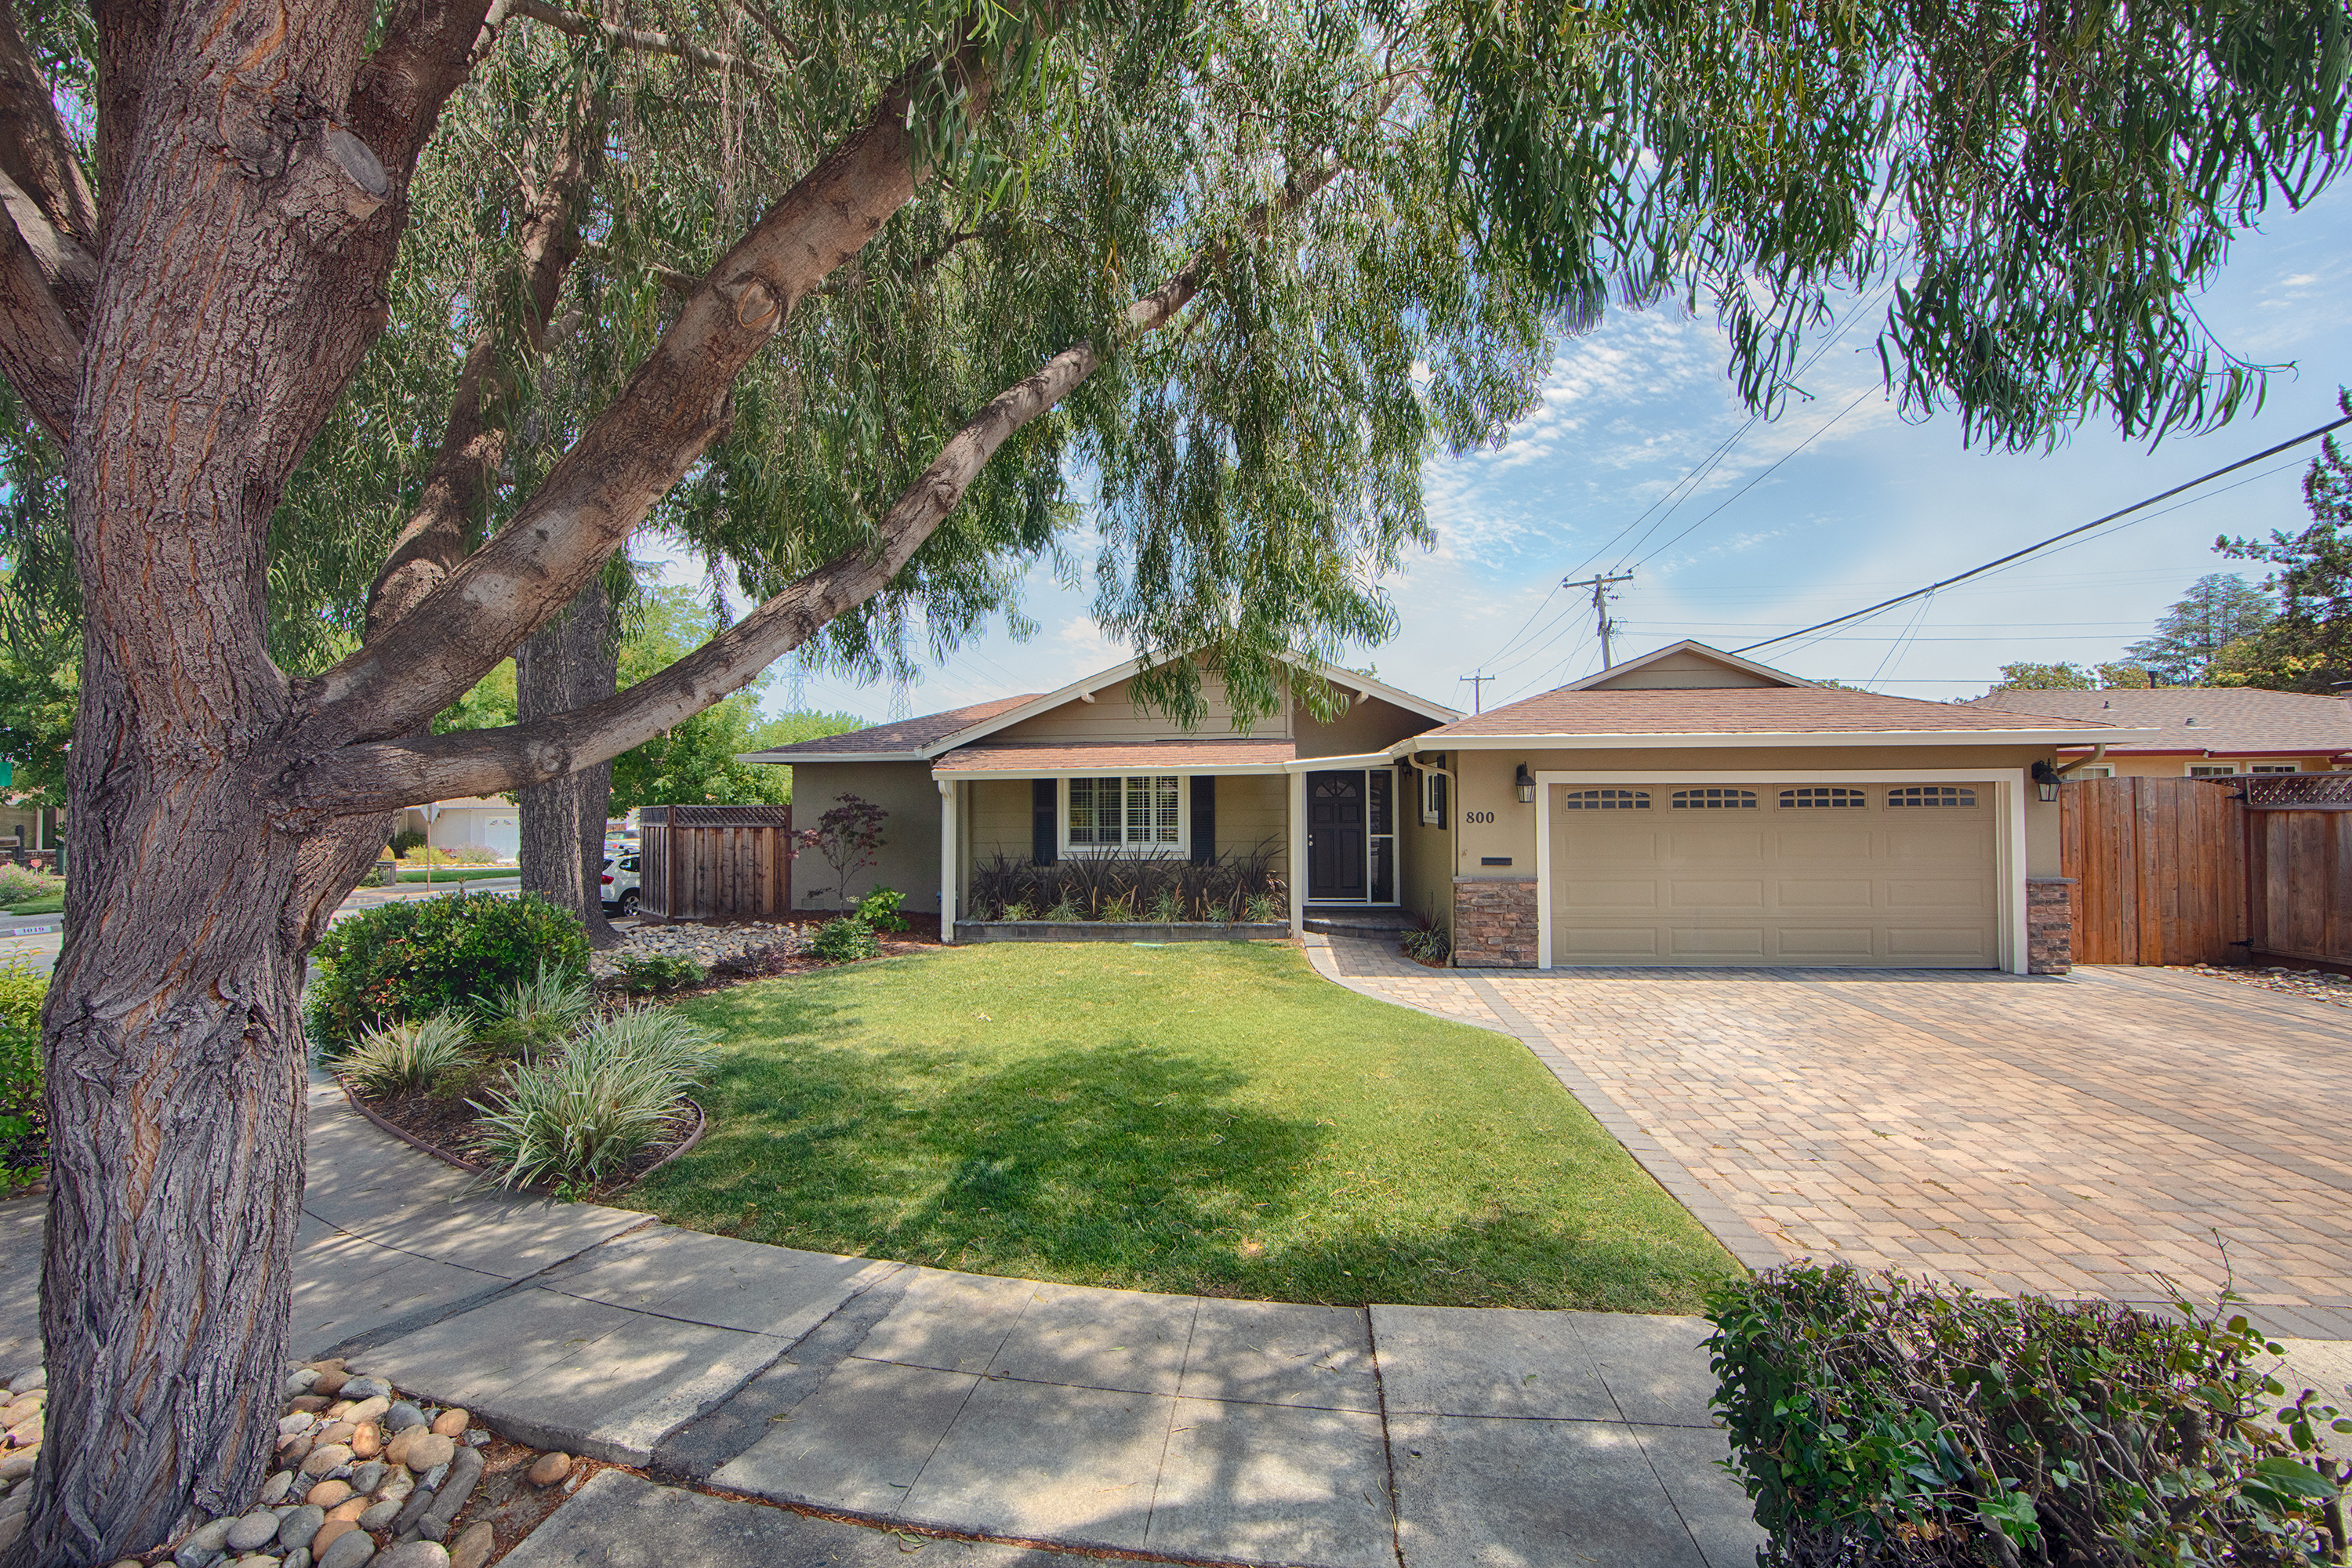 800 Mulberry Ln, Sunnyvale 94087 - Mulberry Ln 800 